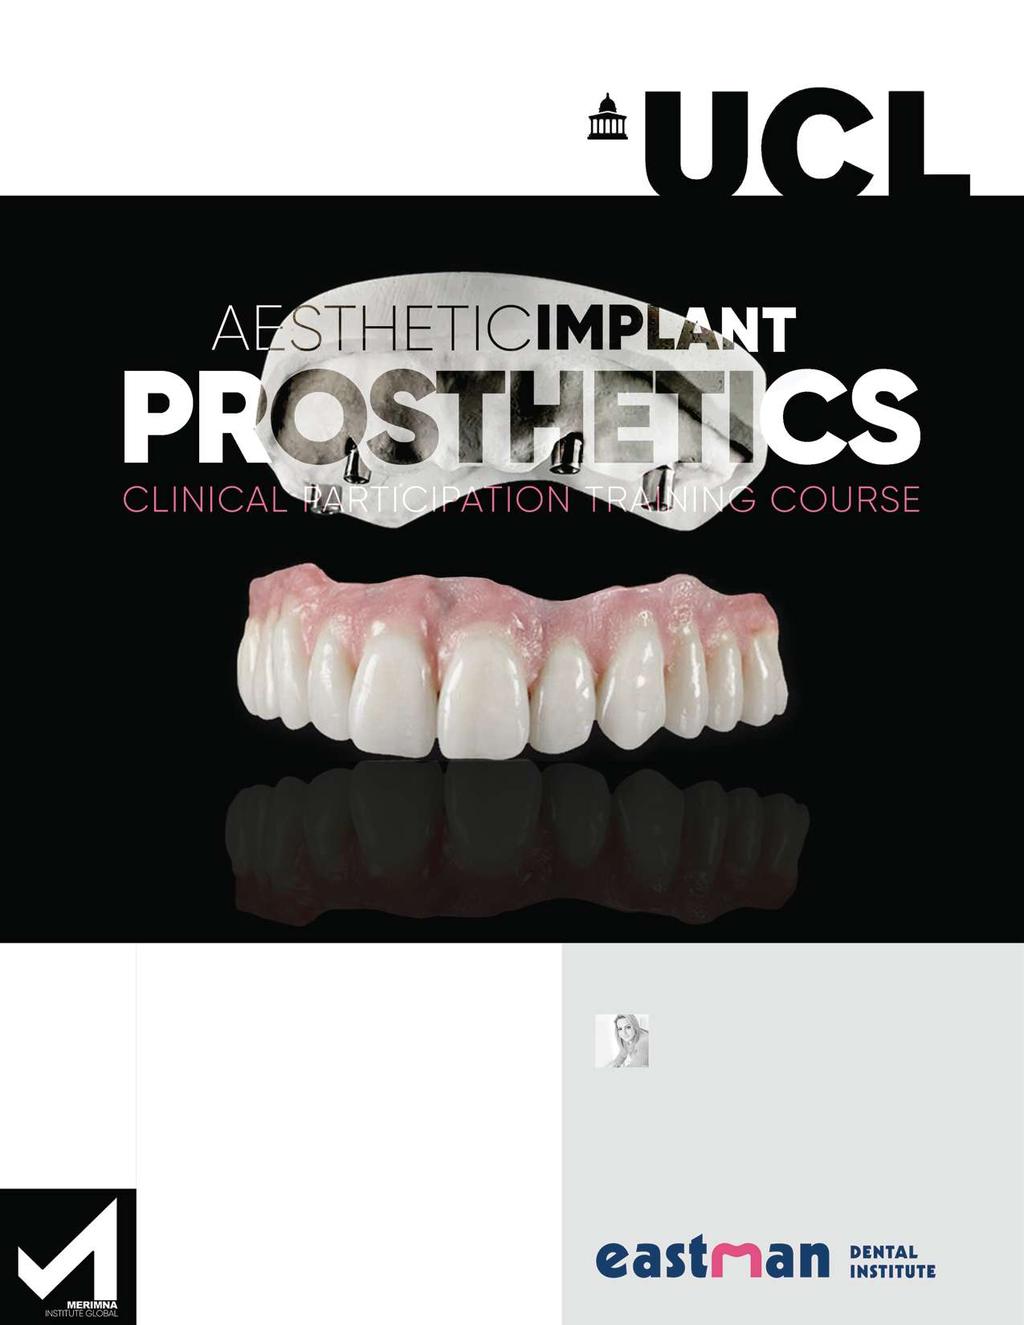 Planning and Restoring the Aesthetic Implant Patient: From A to Z 6-DAY CLINICAL COURSE WITH PATIENTS 39 OFFICIAL CPD HOURS Participants will be awarded with a UCL Eastman CPD Certificate of